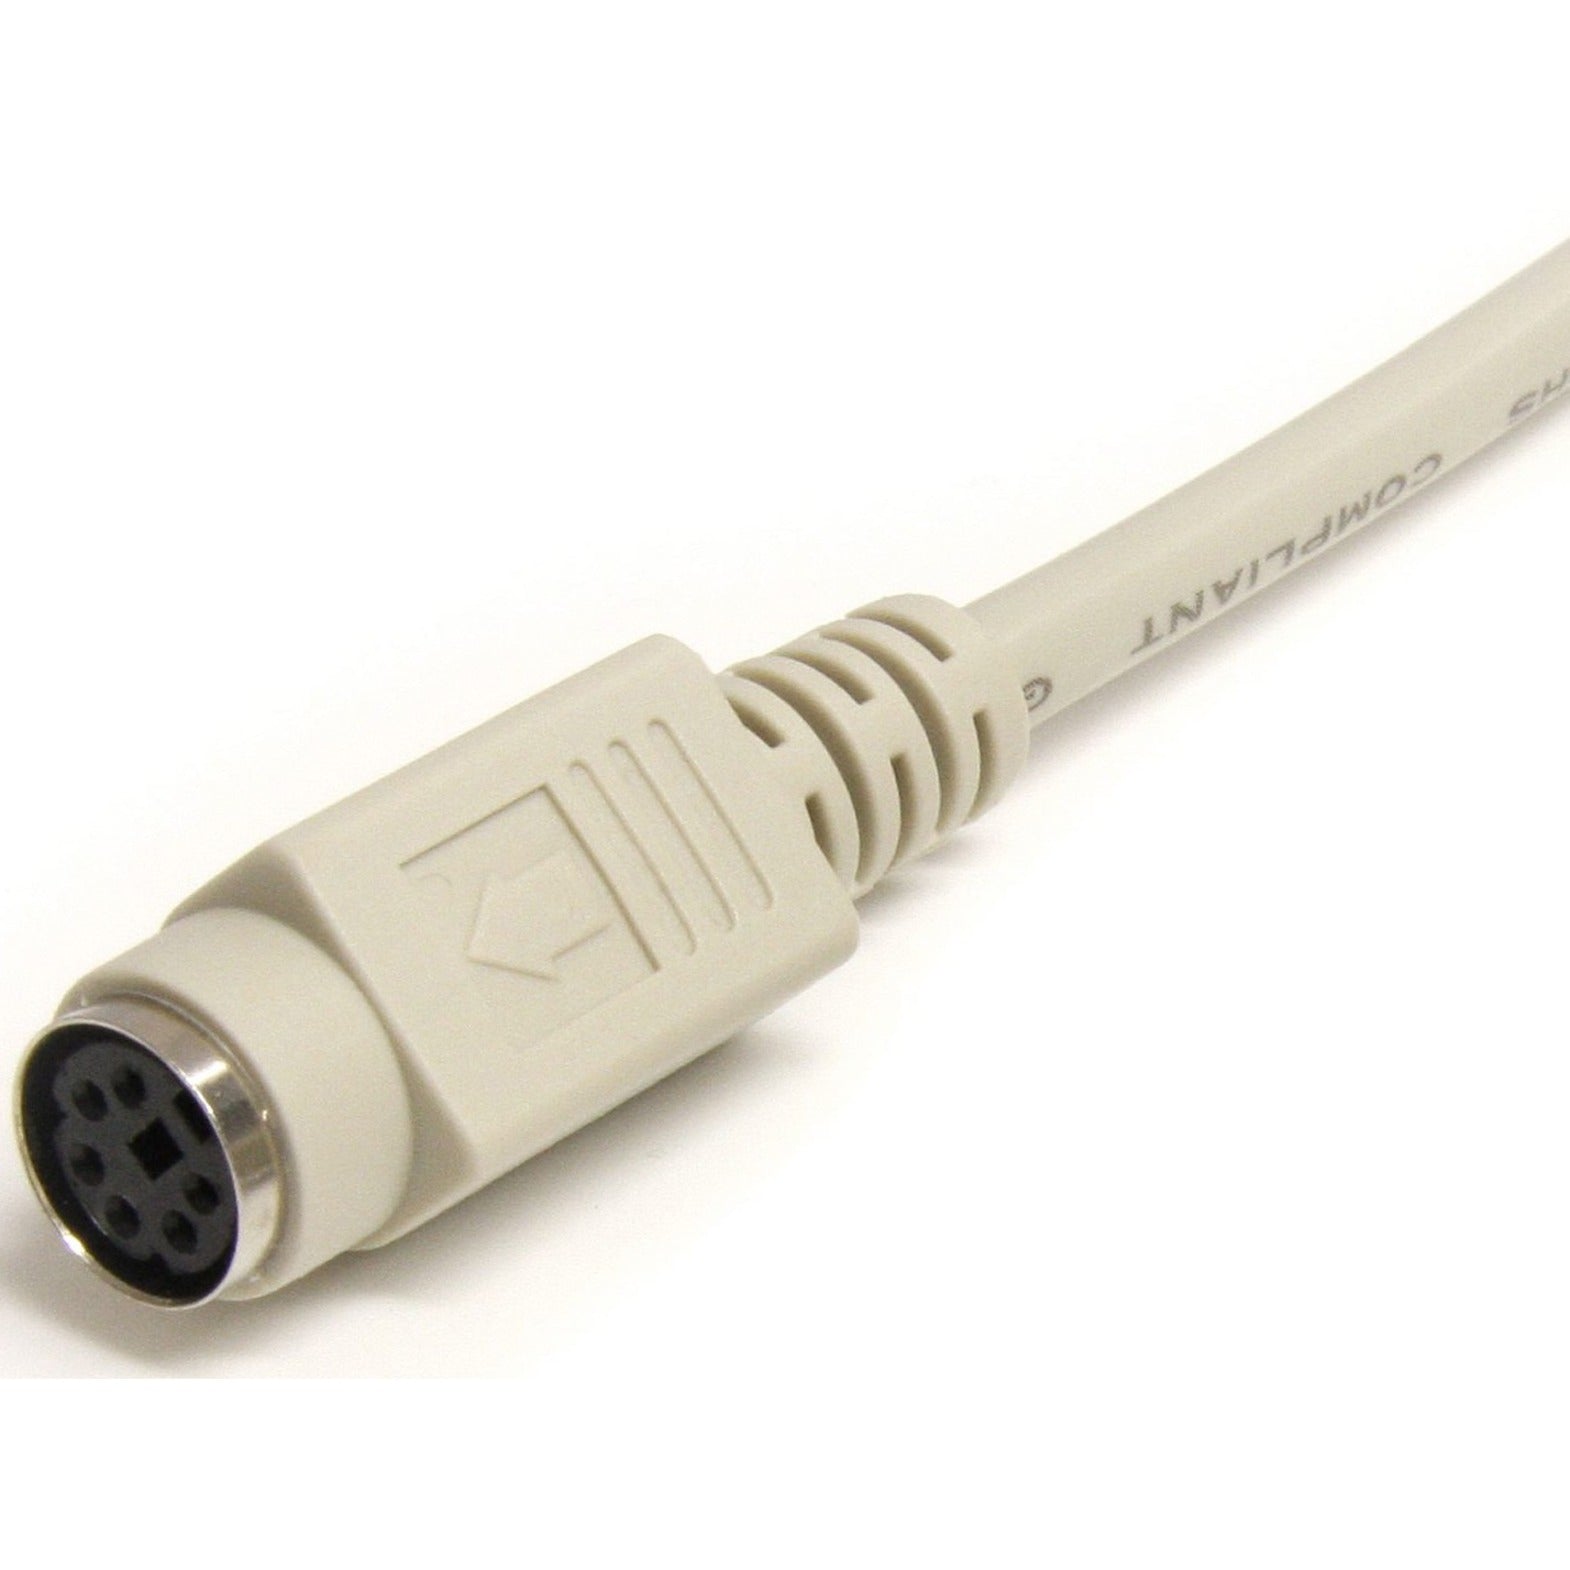 StarTech.com KXT102 PS/2 Keyboard/Mouse Extension Cable, 6 ft, Copper Conductor, Beige